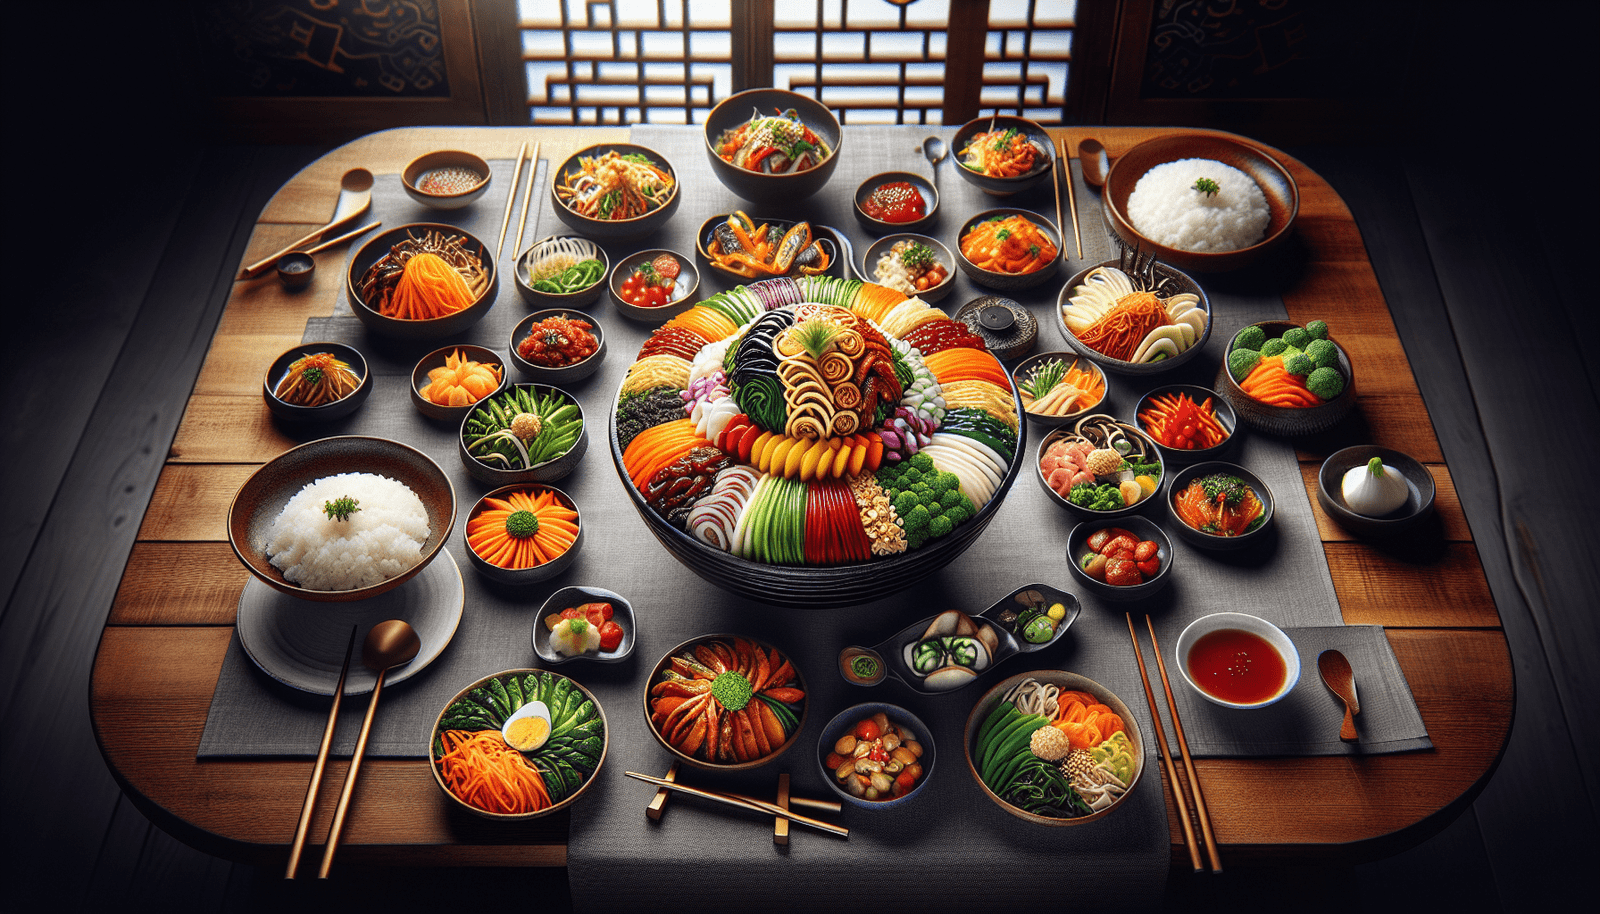 What Role Does Food Presentation And Aesthetics Play In Current Korean Culinary Trends?